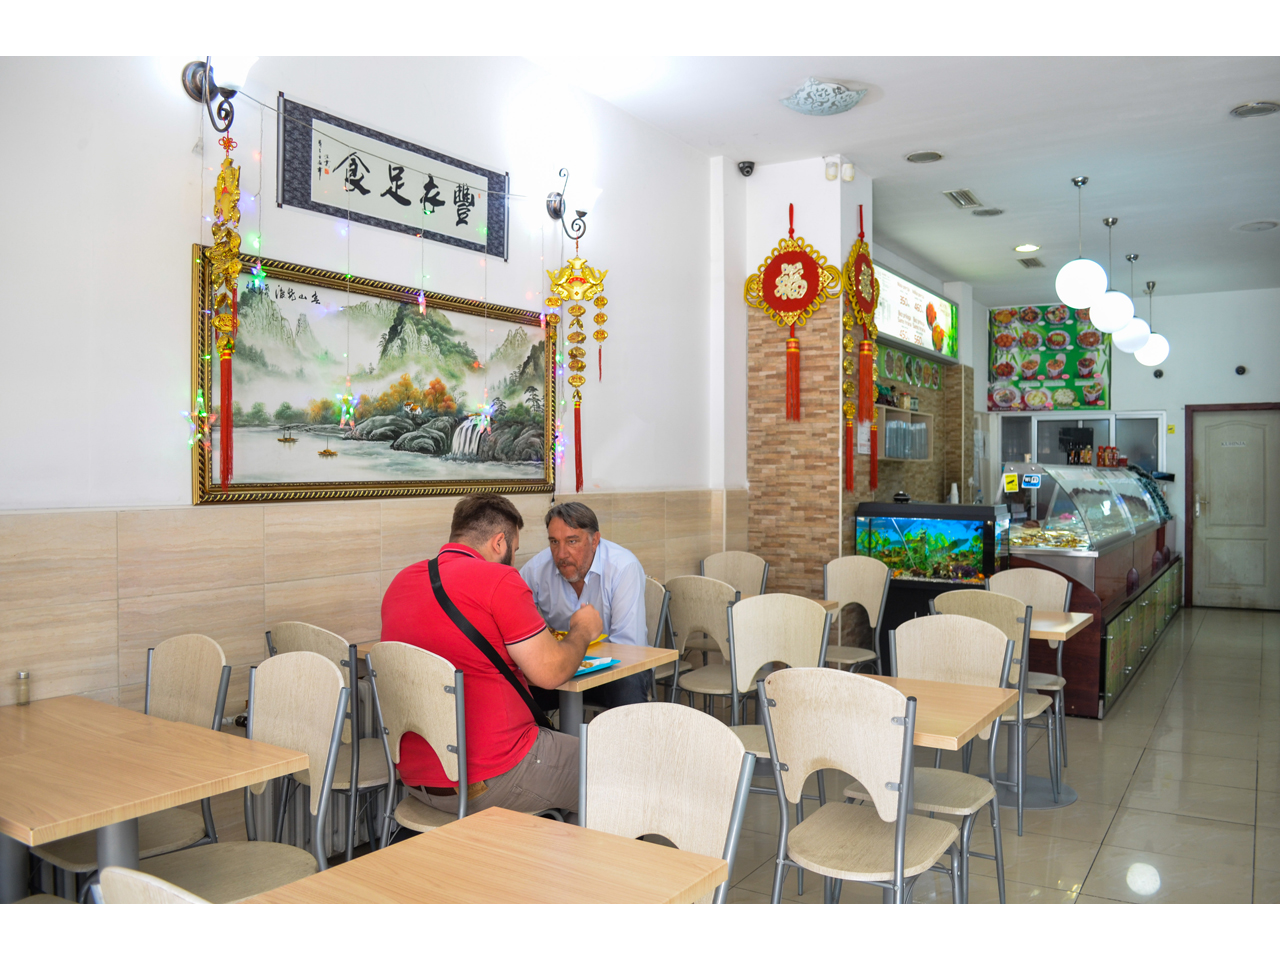 GOOD APPETITE CHINESE FOOD Chinese cuisine Beograd